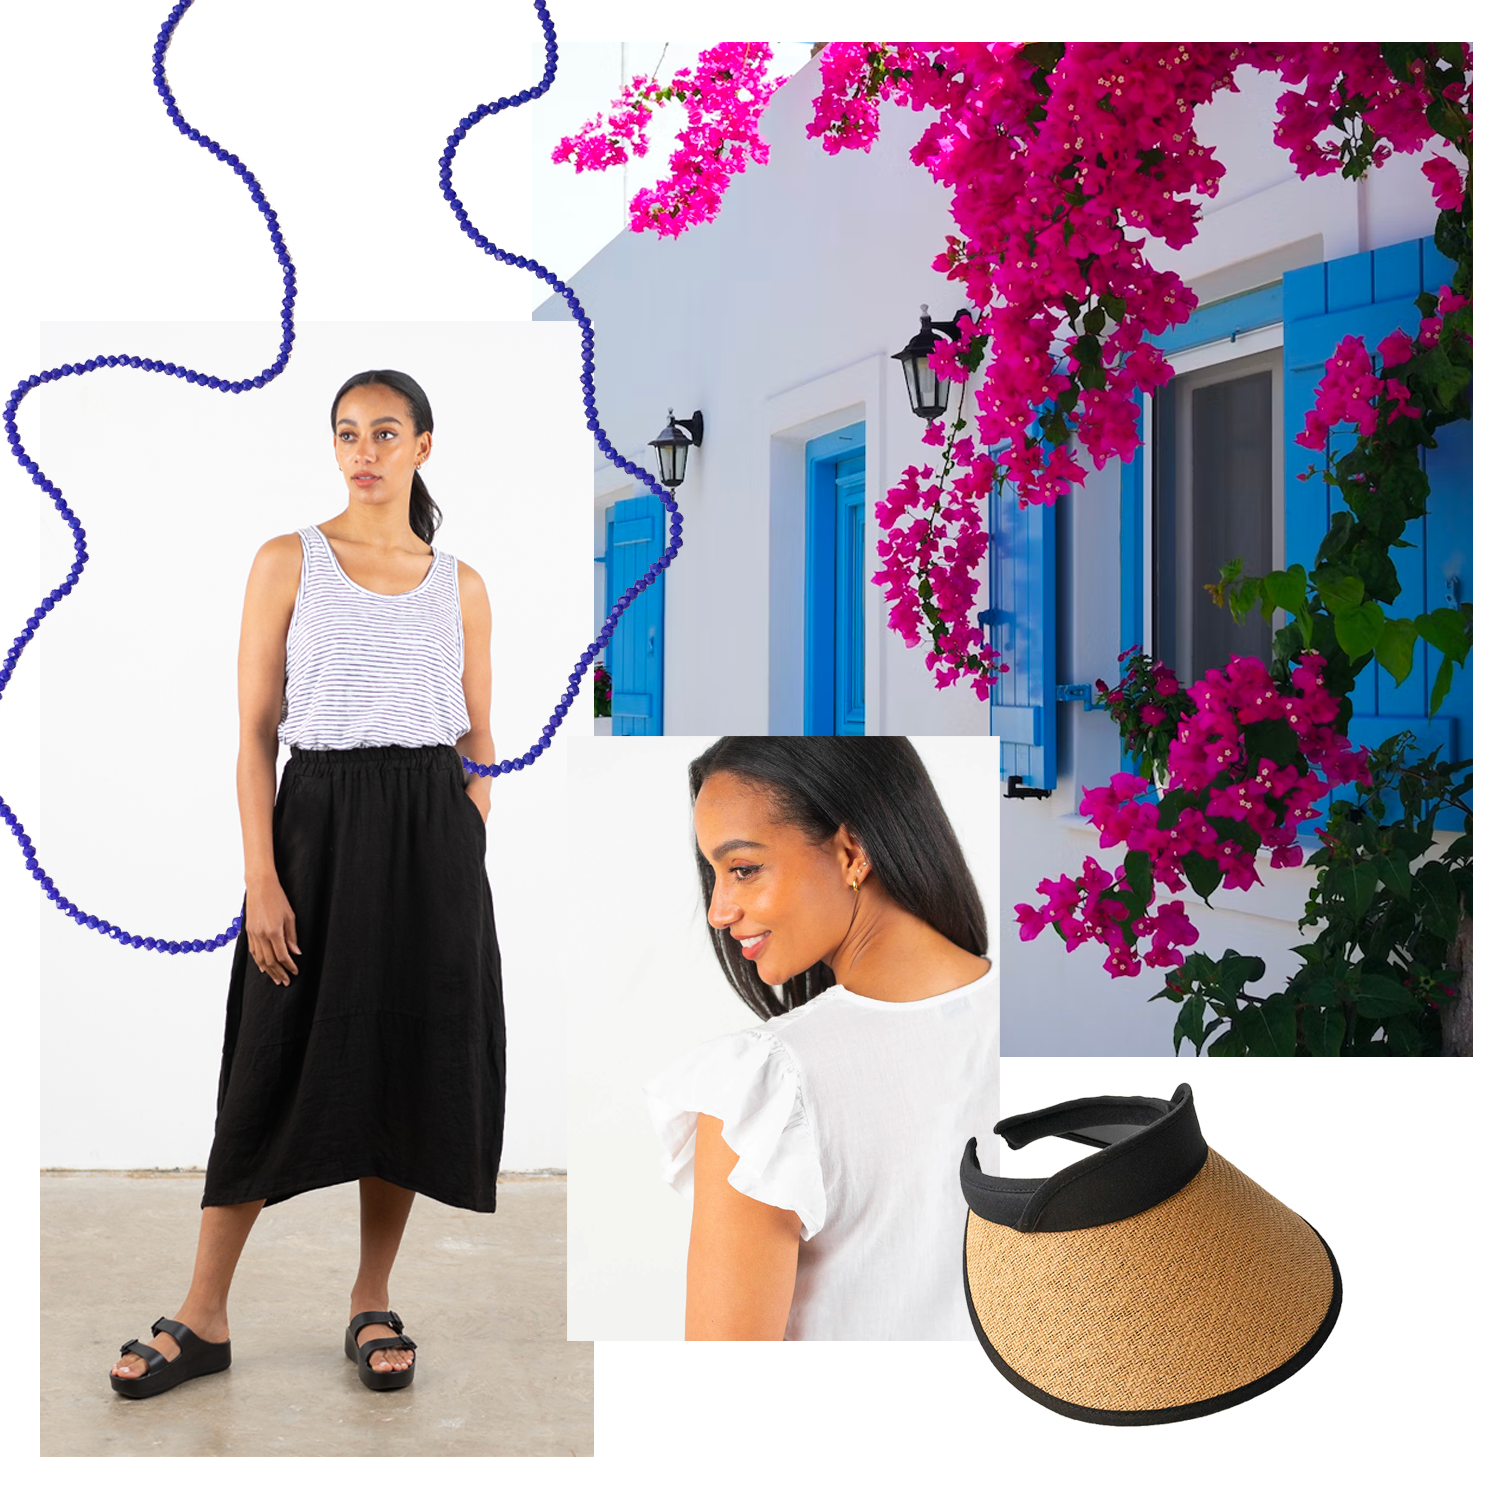 A collage of images featuring blue screens on a house in Sorrento, a blue beaded necklace, wicker bonnet sun hat, a model wearing a white top with frill shoulder detail and a model wearing a blue and white striped vest with a black linen tulip shaped midi skirt and black platform slides